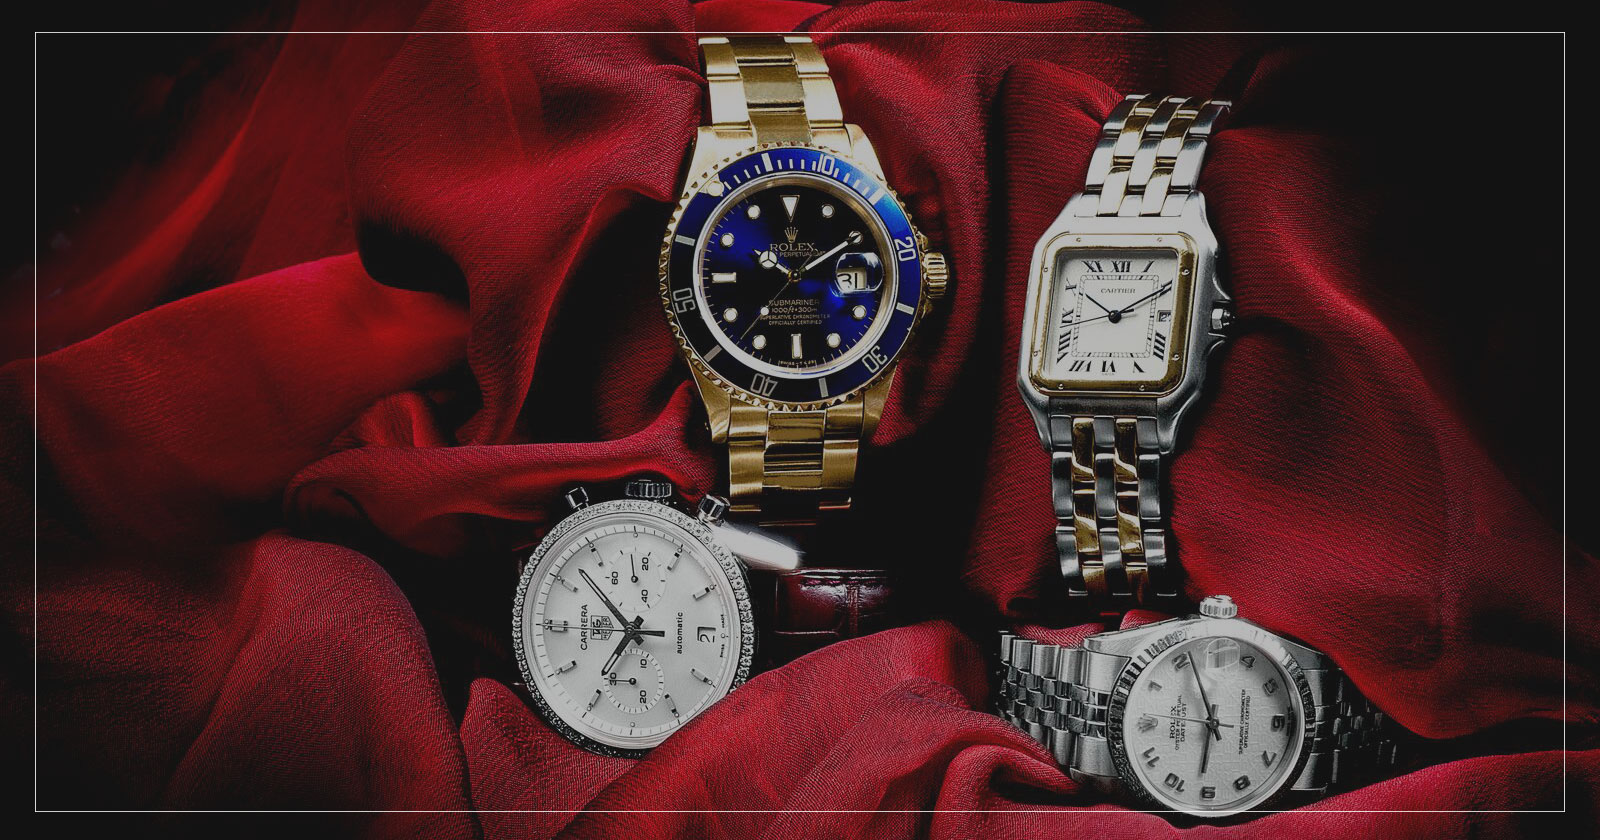 Pre-owned watches from brands that Leo Hamel Gold & Jewelry Buyers will purchase including Rolex, Cartier, and TAG Heuer.